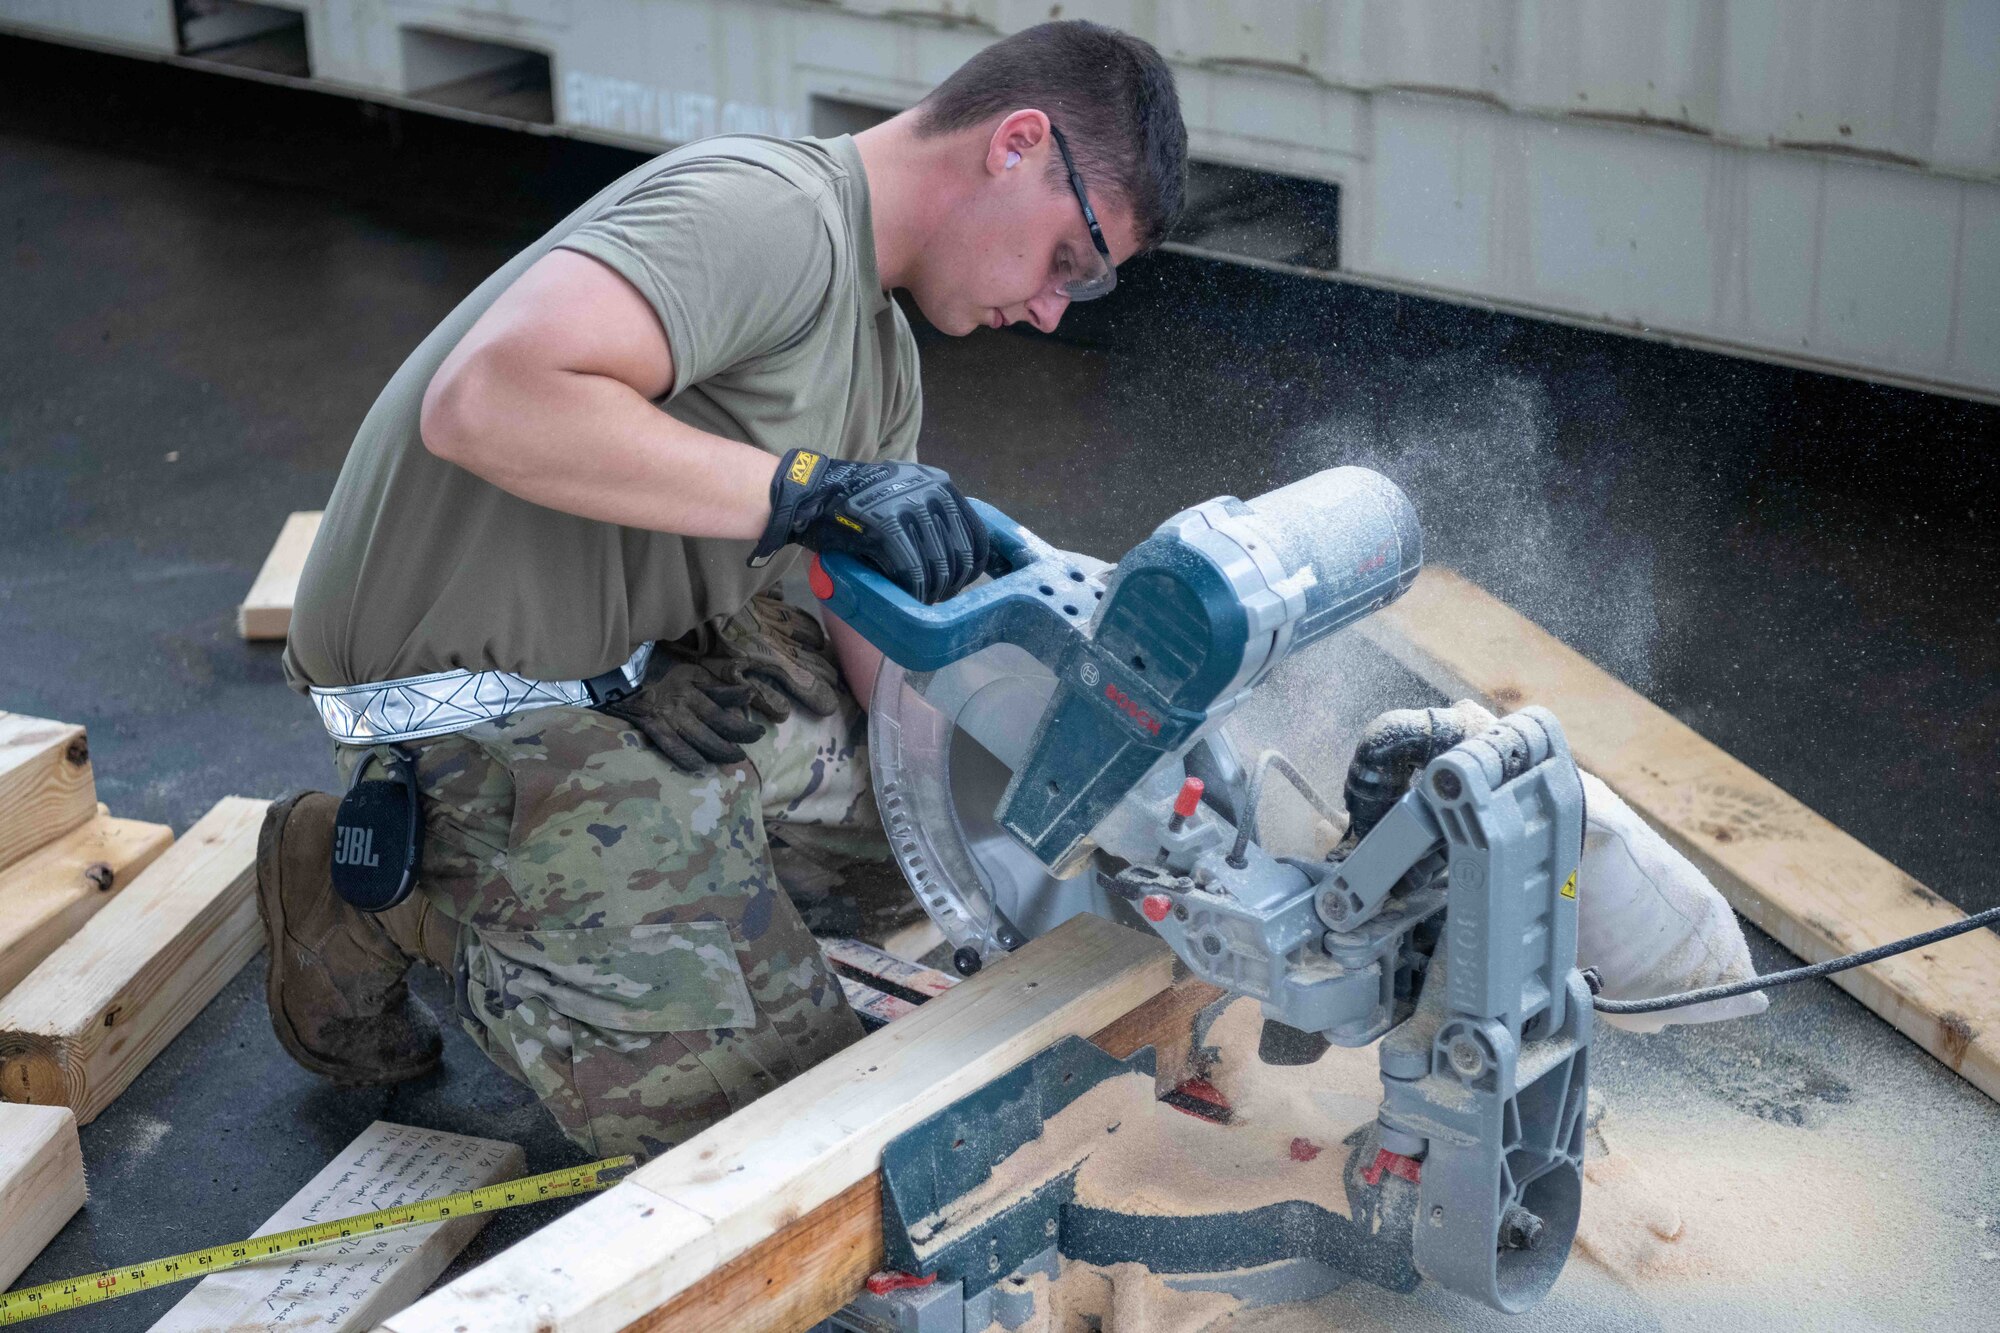 A military member saws a plank of wood to make a brace.